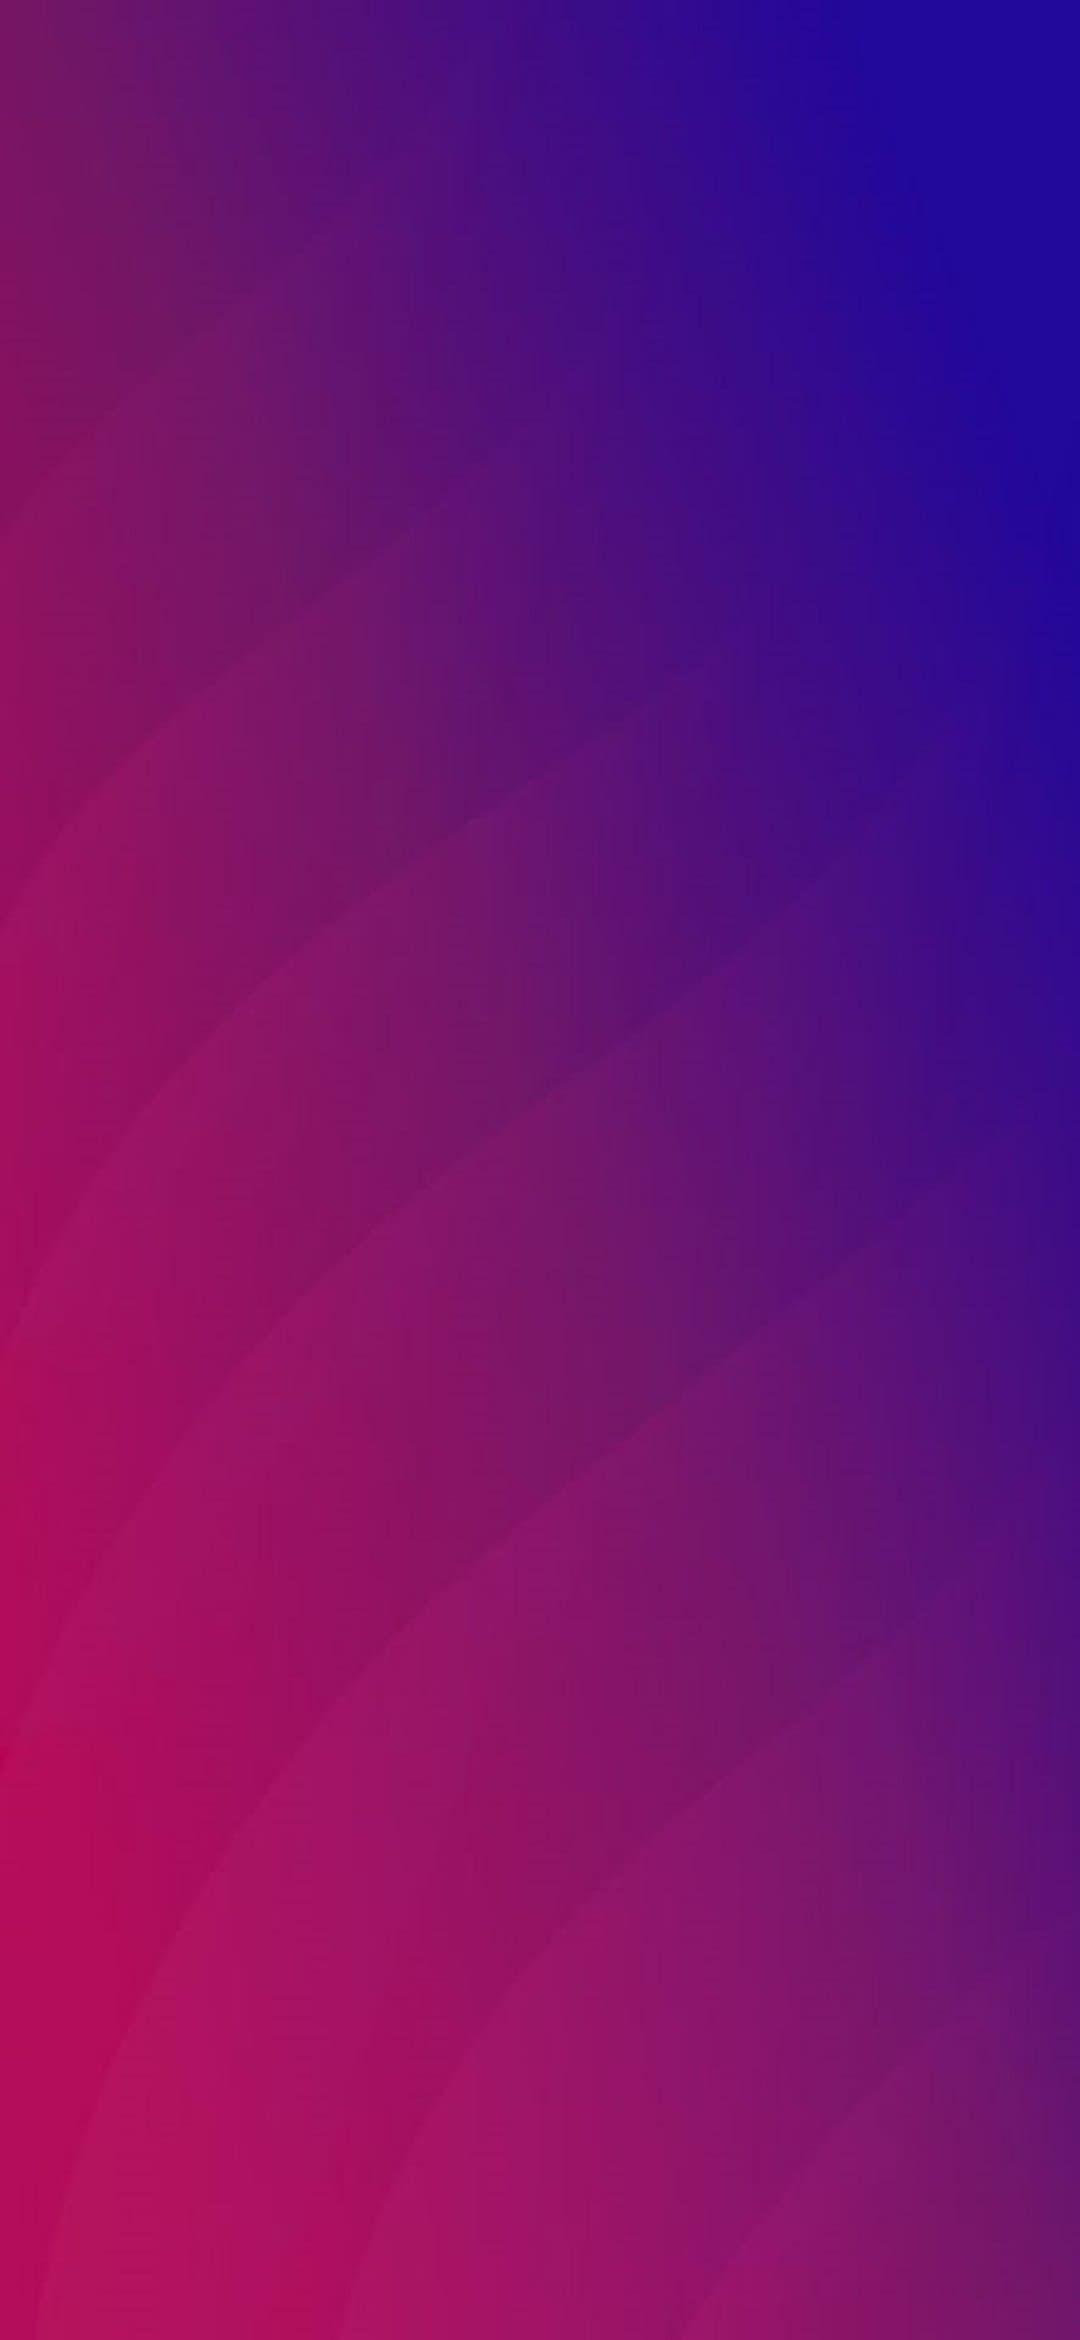 Download Oppo Find X Stock Wallpaper (13 FHD+ Wallpaper)